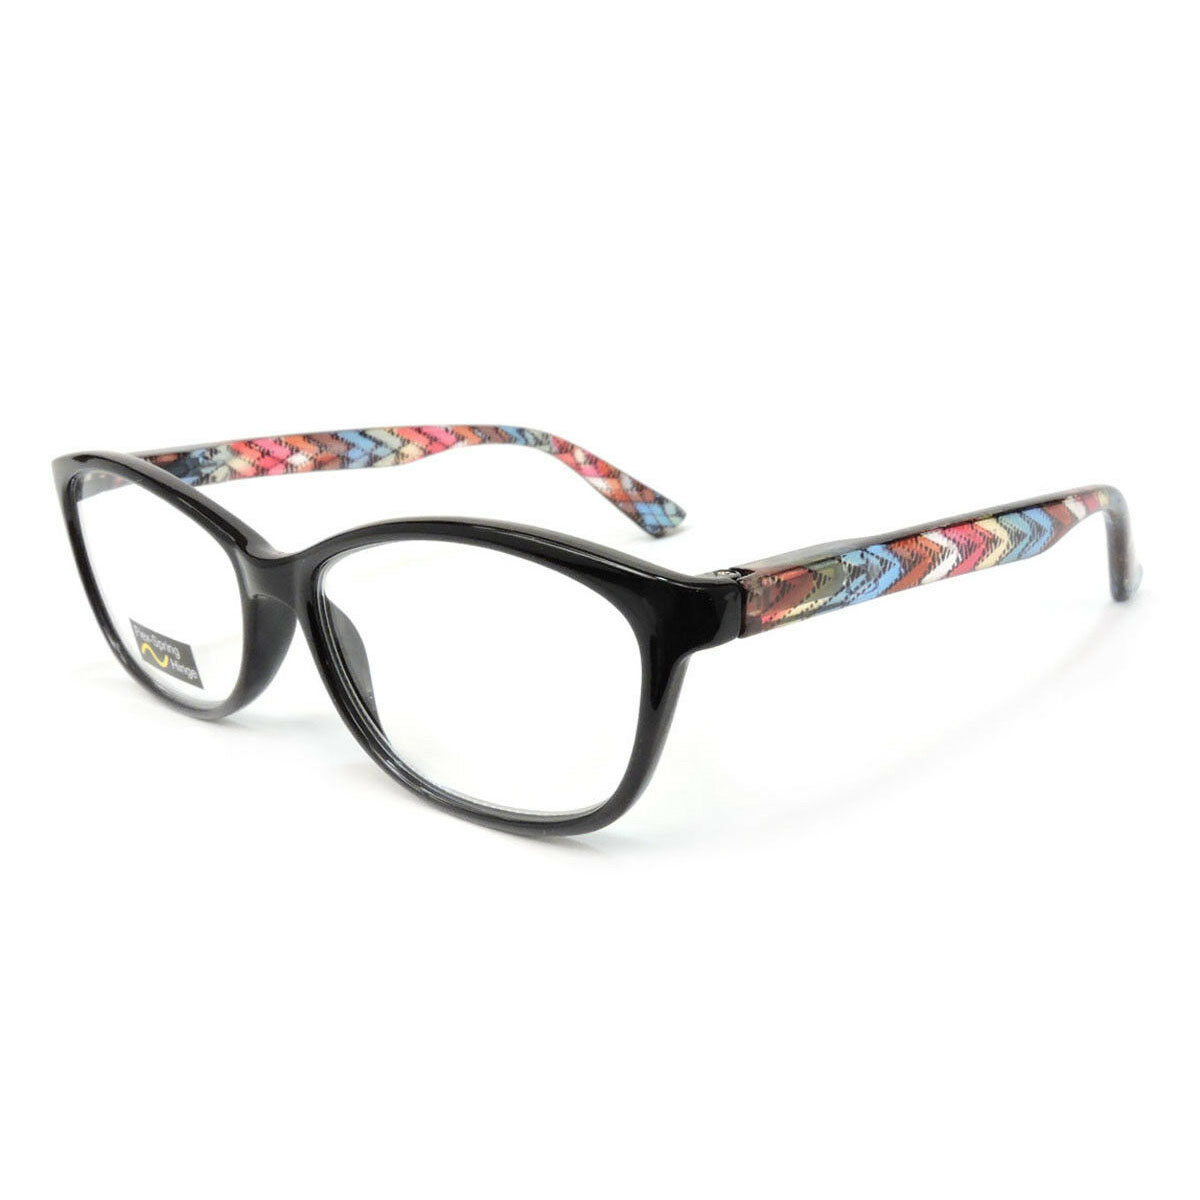 Classic Frame Reading Glasses Colorful Arms Retro Vintage Style - Brown, +2.50